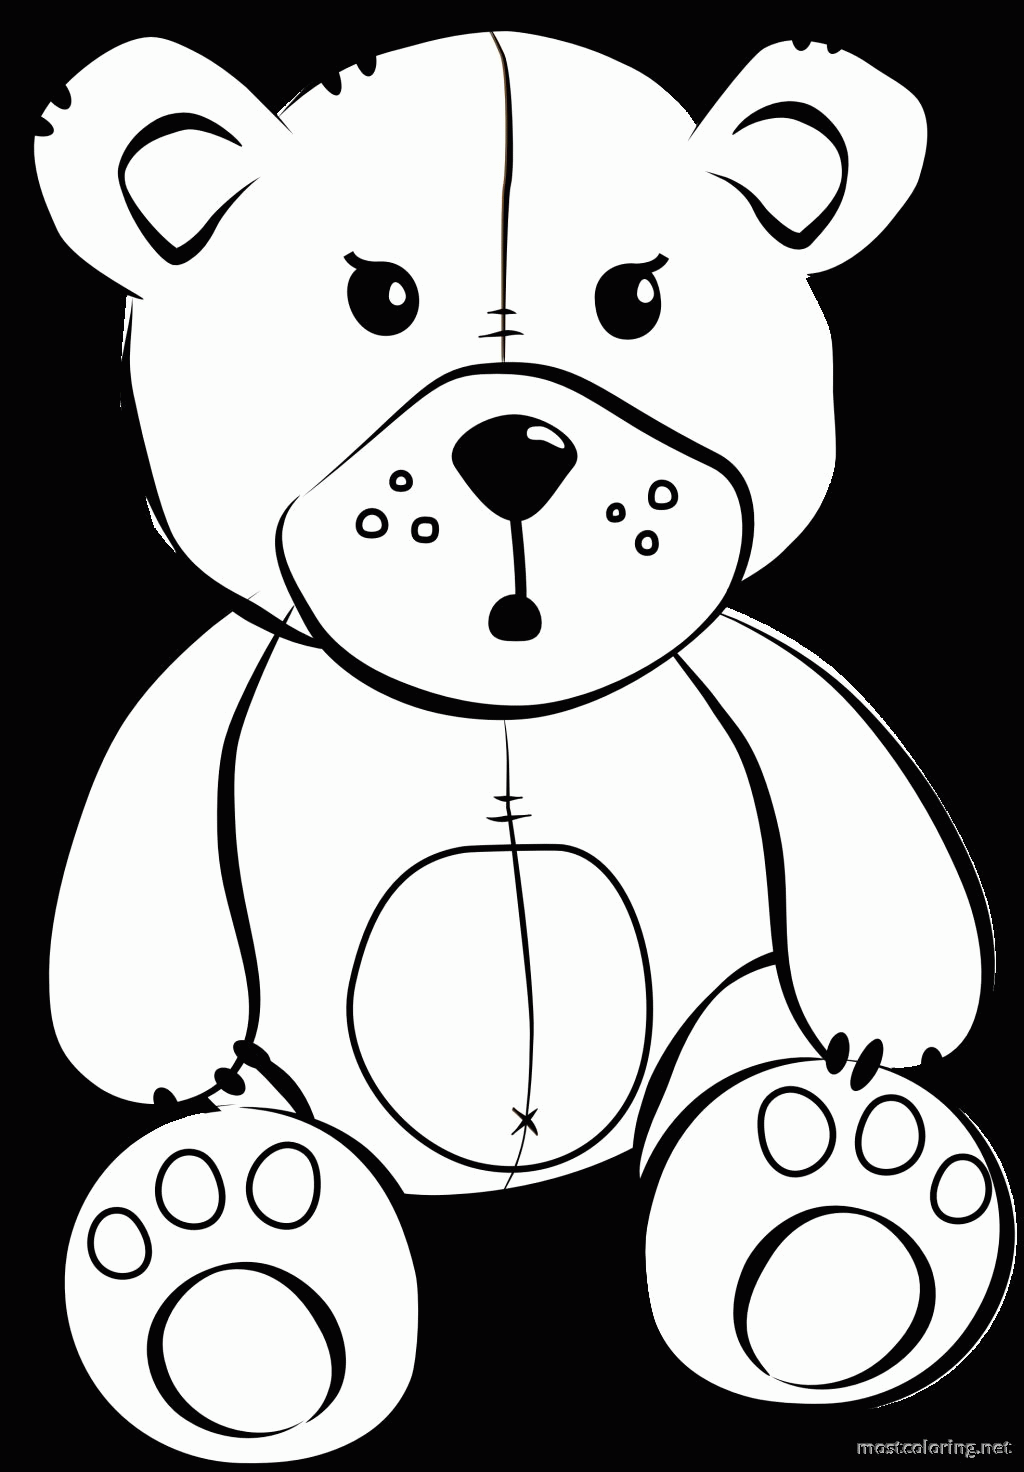 Stuffed Animal Coloring Pages | Coloring Pages Printable